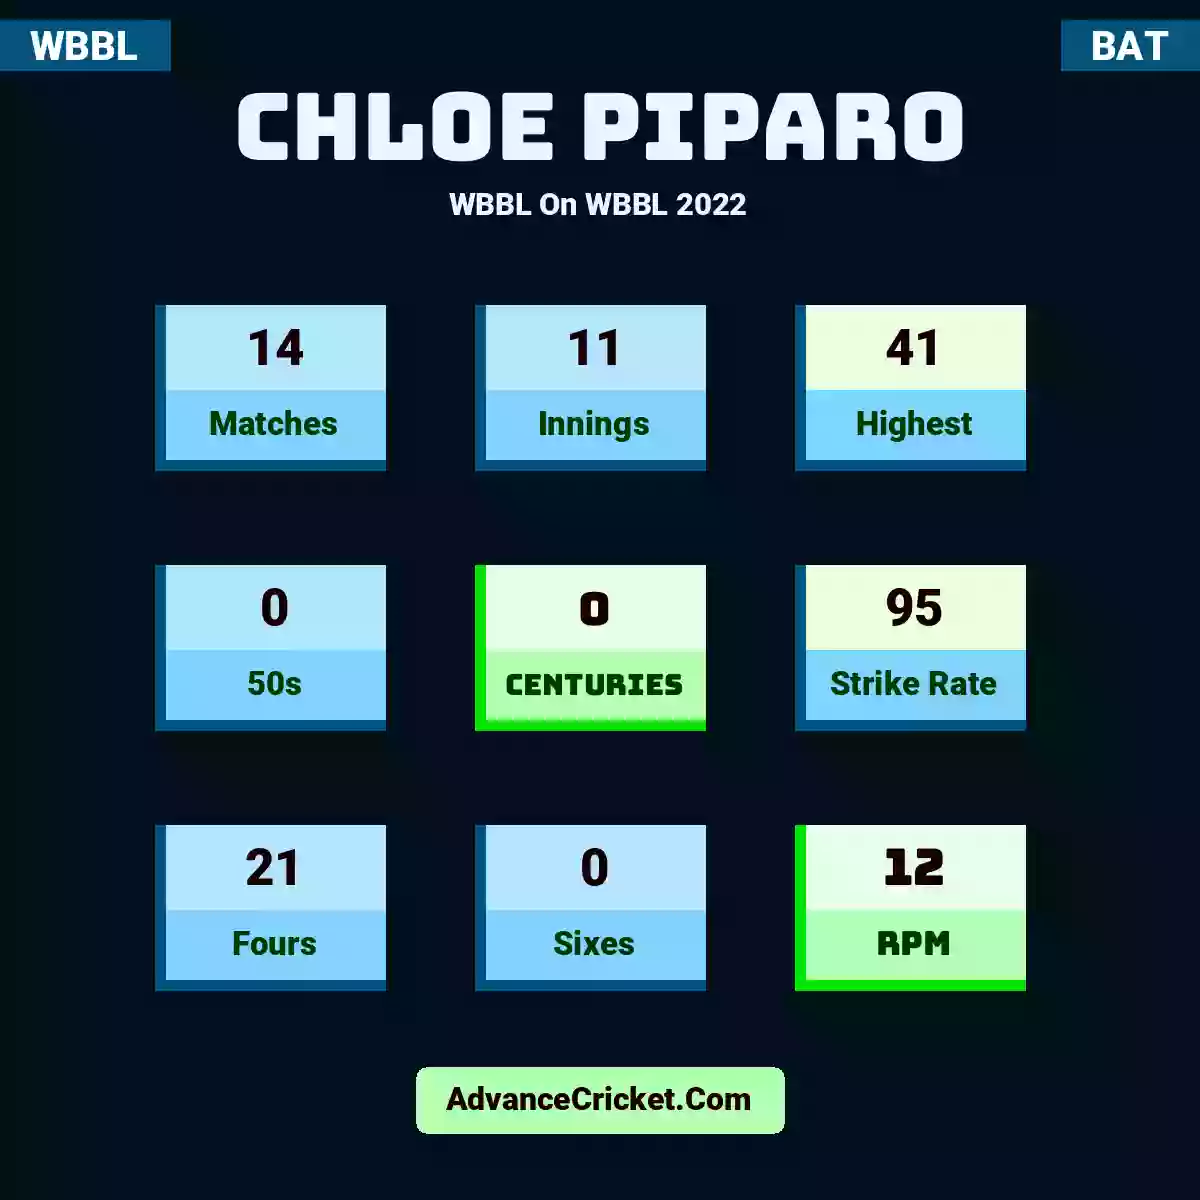 Chloe Piparo WBBL  On WBBL 2022, Chloe Piparo played 14 matches, scored 41 runs as highest, 0 half-centuries, and 0 centuries, with a strike rate of 95. C.Piparo hit 21 fours and 0 sixes, with an RPM of 12.